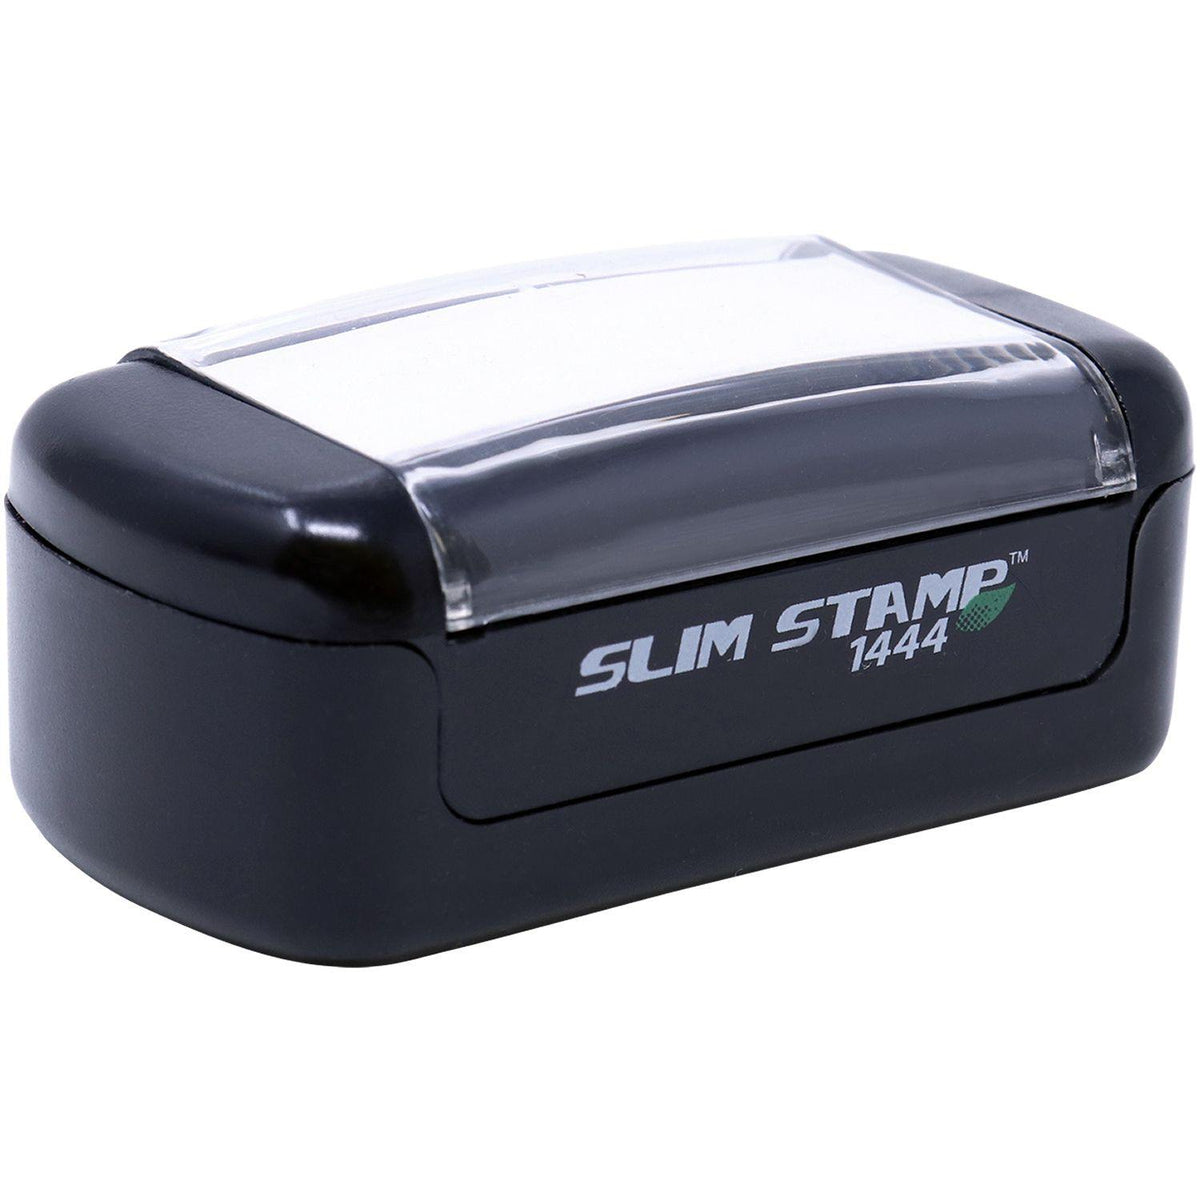 Alt View of Slim Pre Inked Expert Witness Stamp Mount Angle